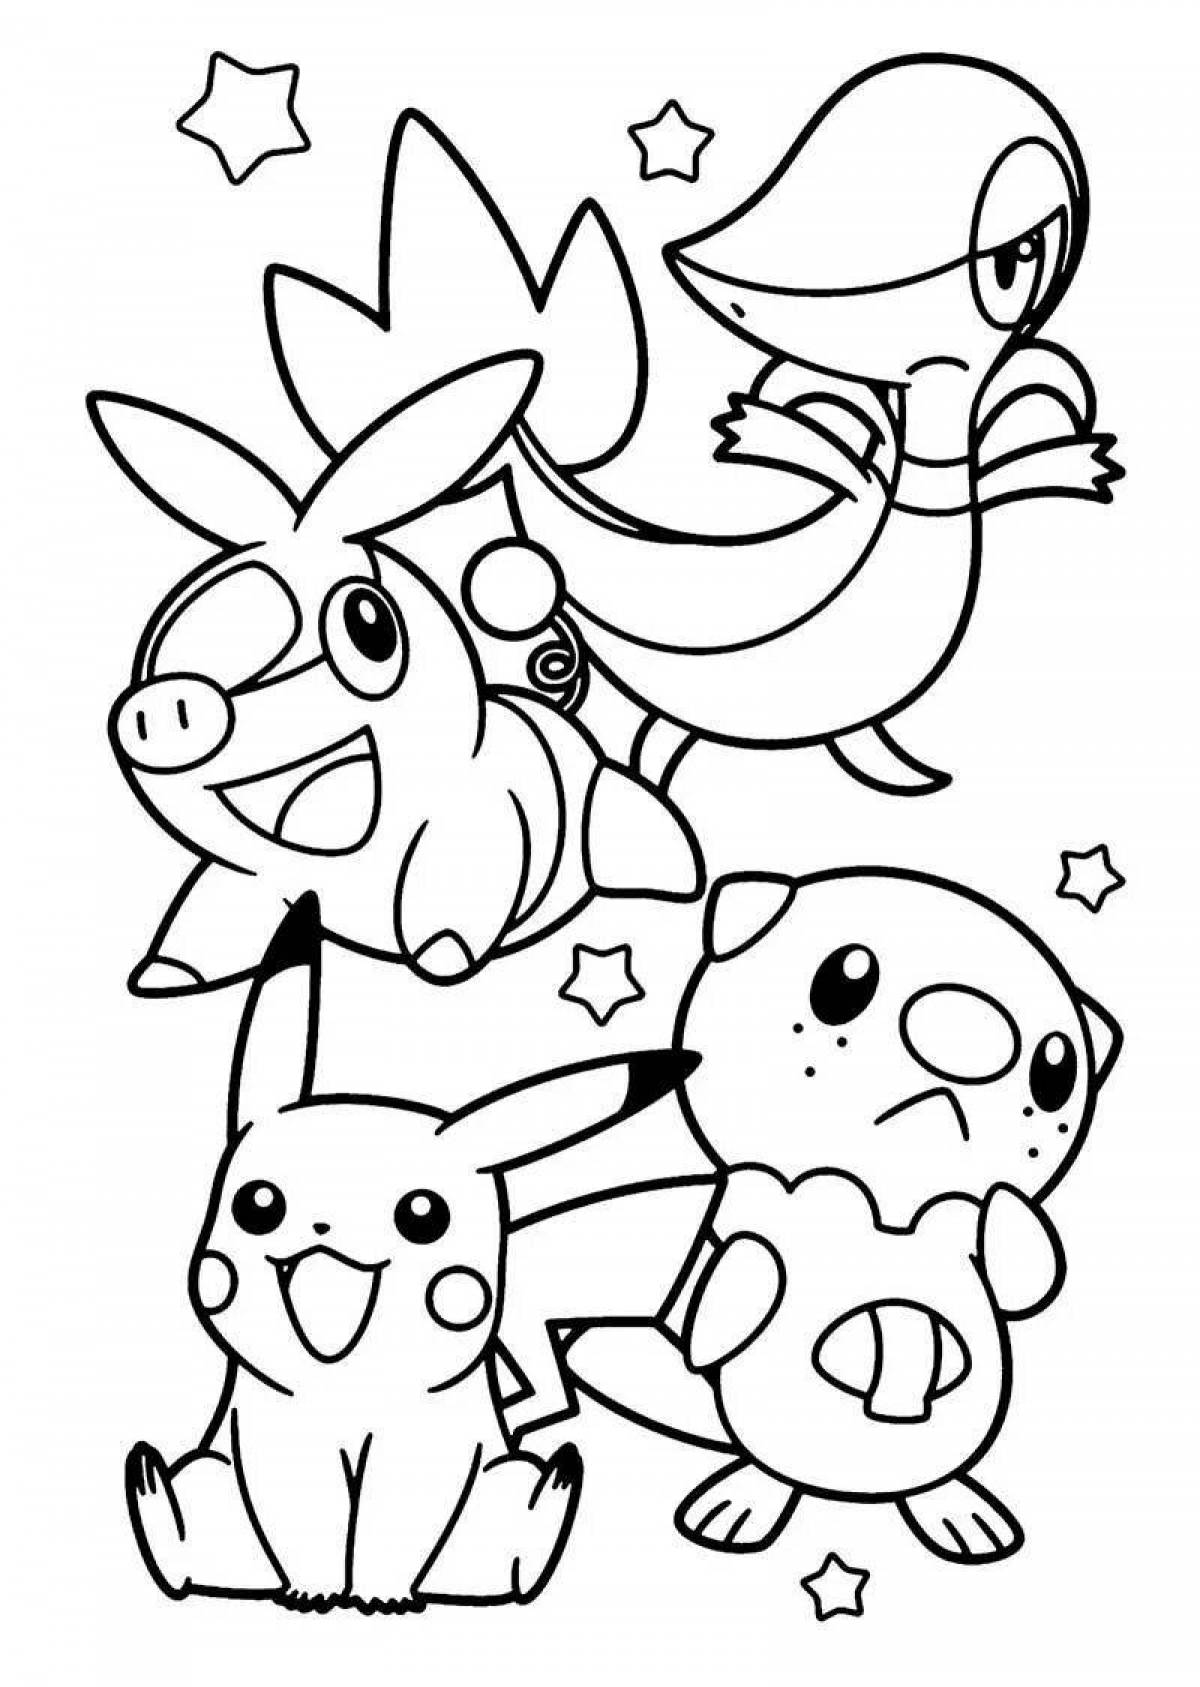 Fabulous pokemon coloring pages for kids